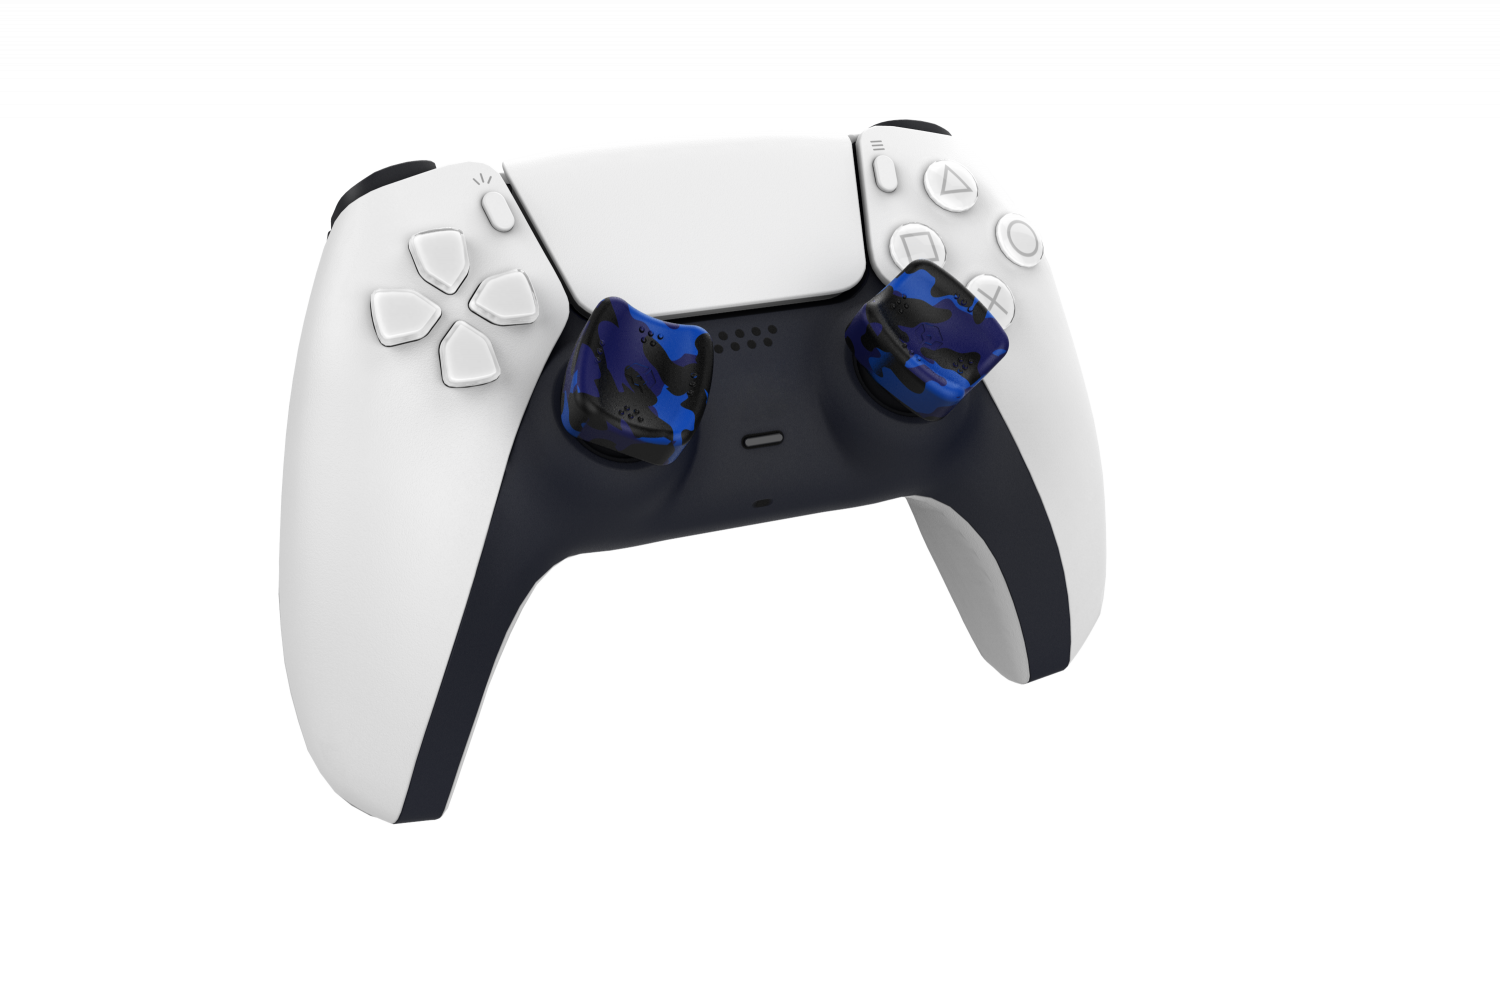 PS5 SNIPER THUMB GRIPS, BLUE CAMO | Nordic Game Supply